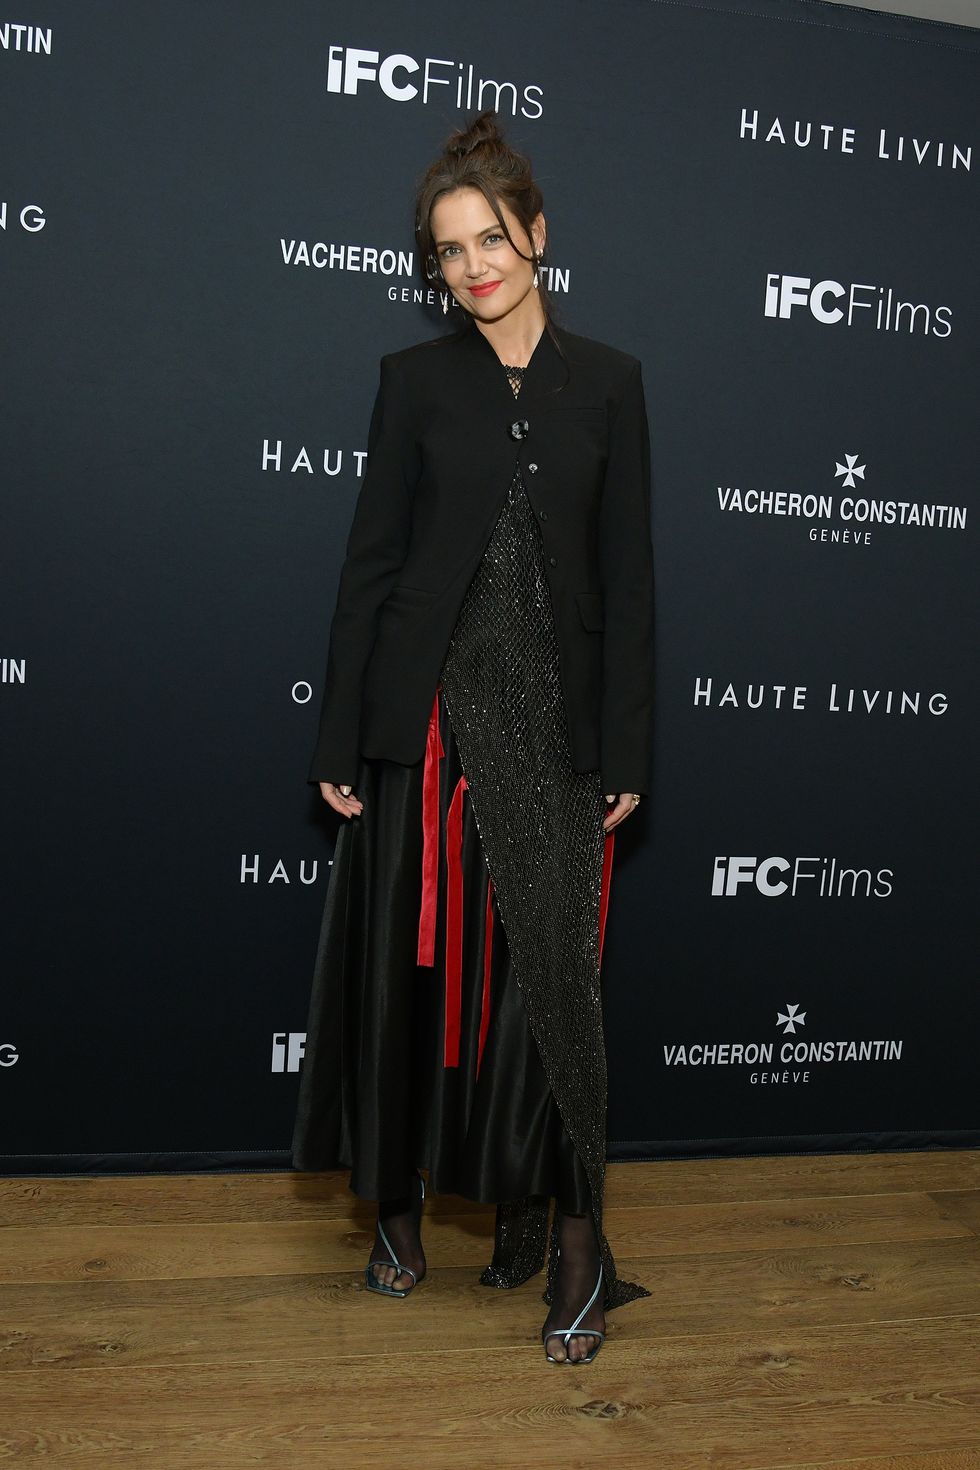 katie holmes at the haute living screening of "rare objects" held at the crosby street hotel on april 10, 2023 in new york city photo by kristina bumphreyvariety via getty images